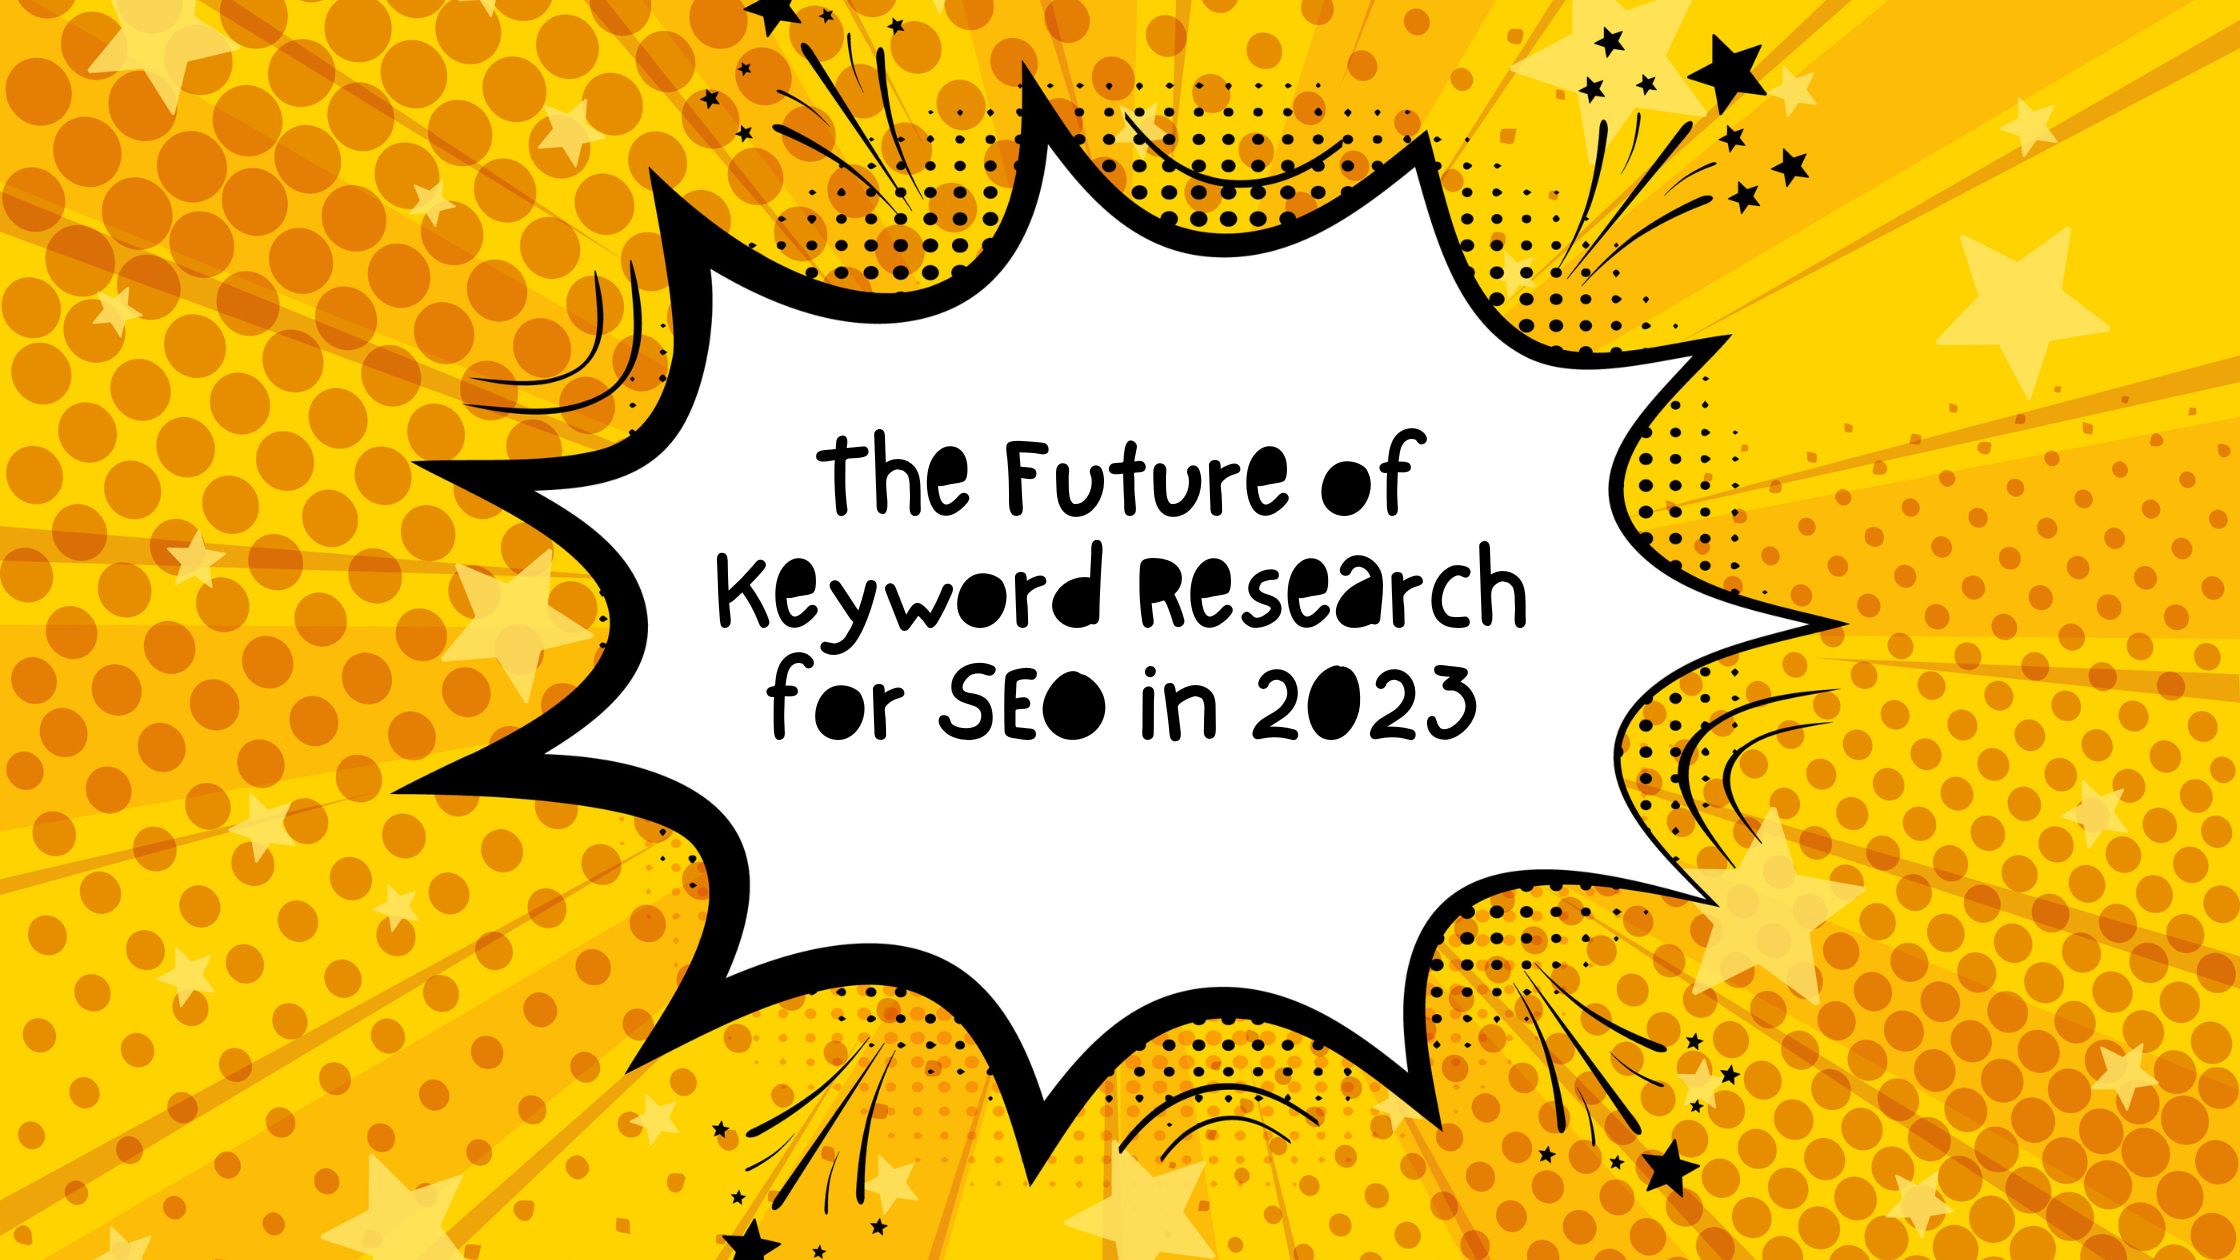 The Future of Keyword Research for SEO in 2023